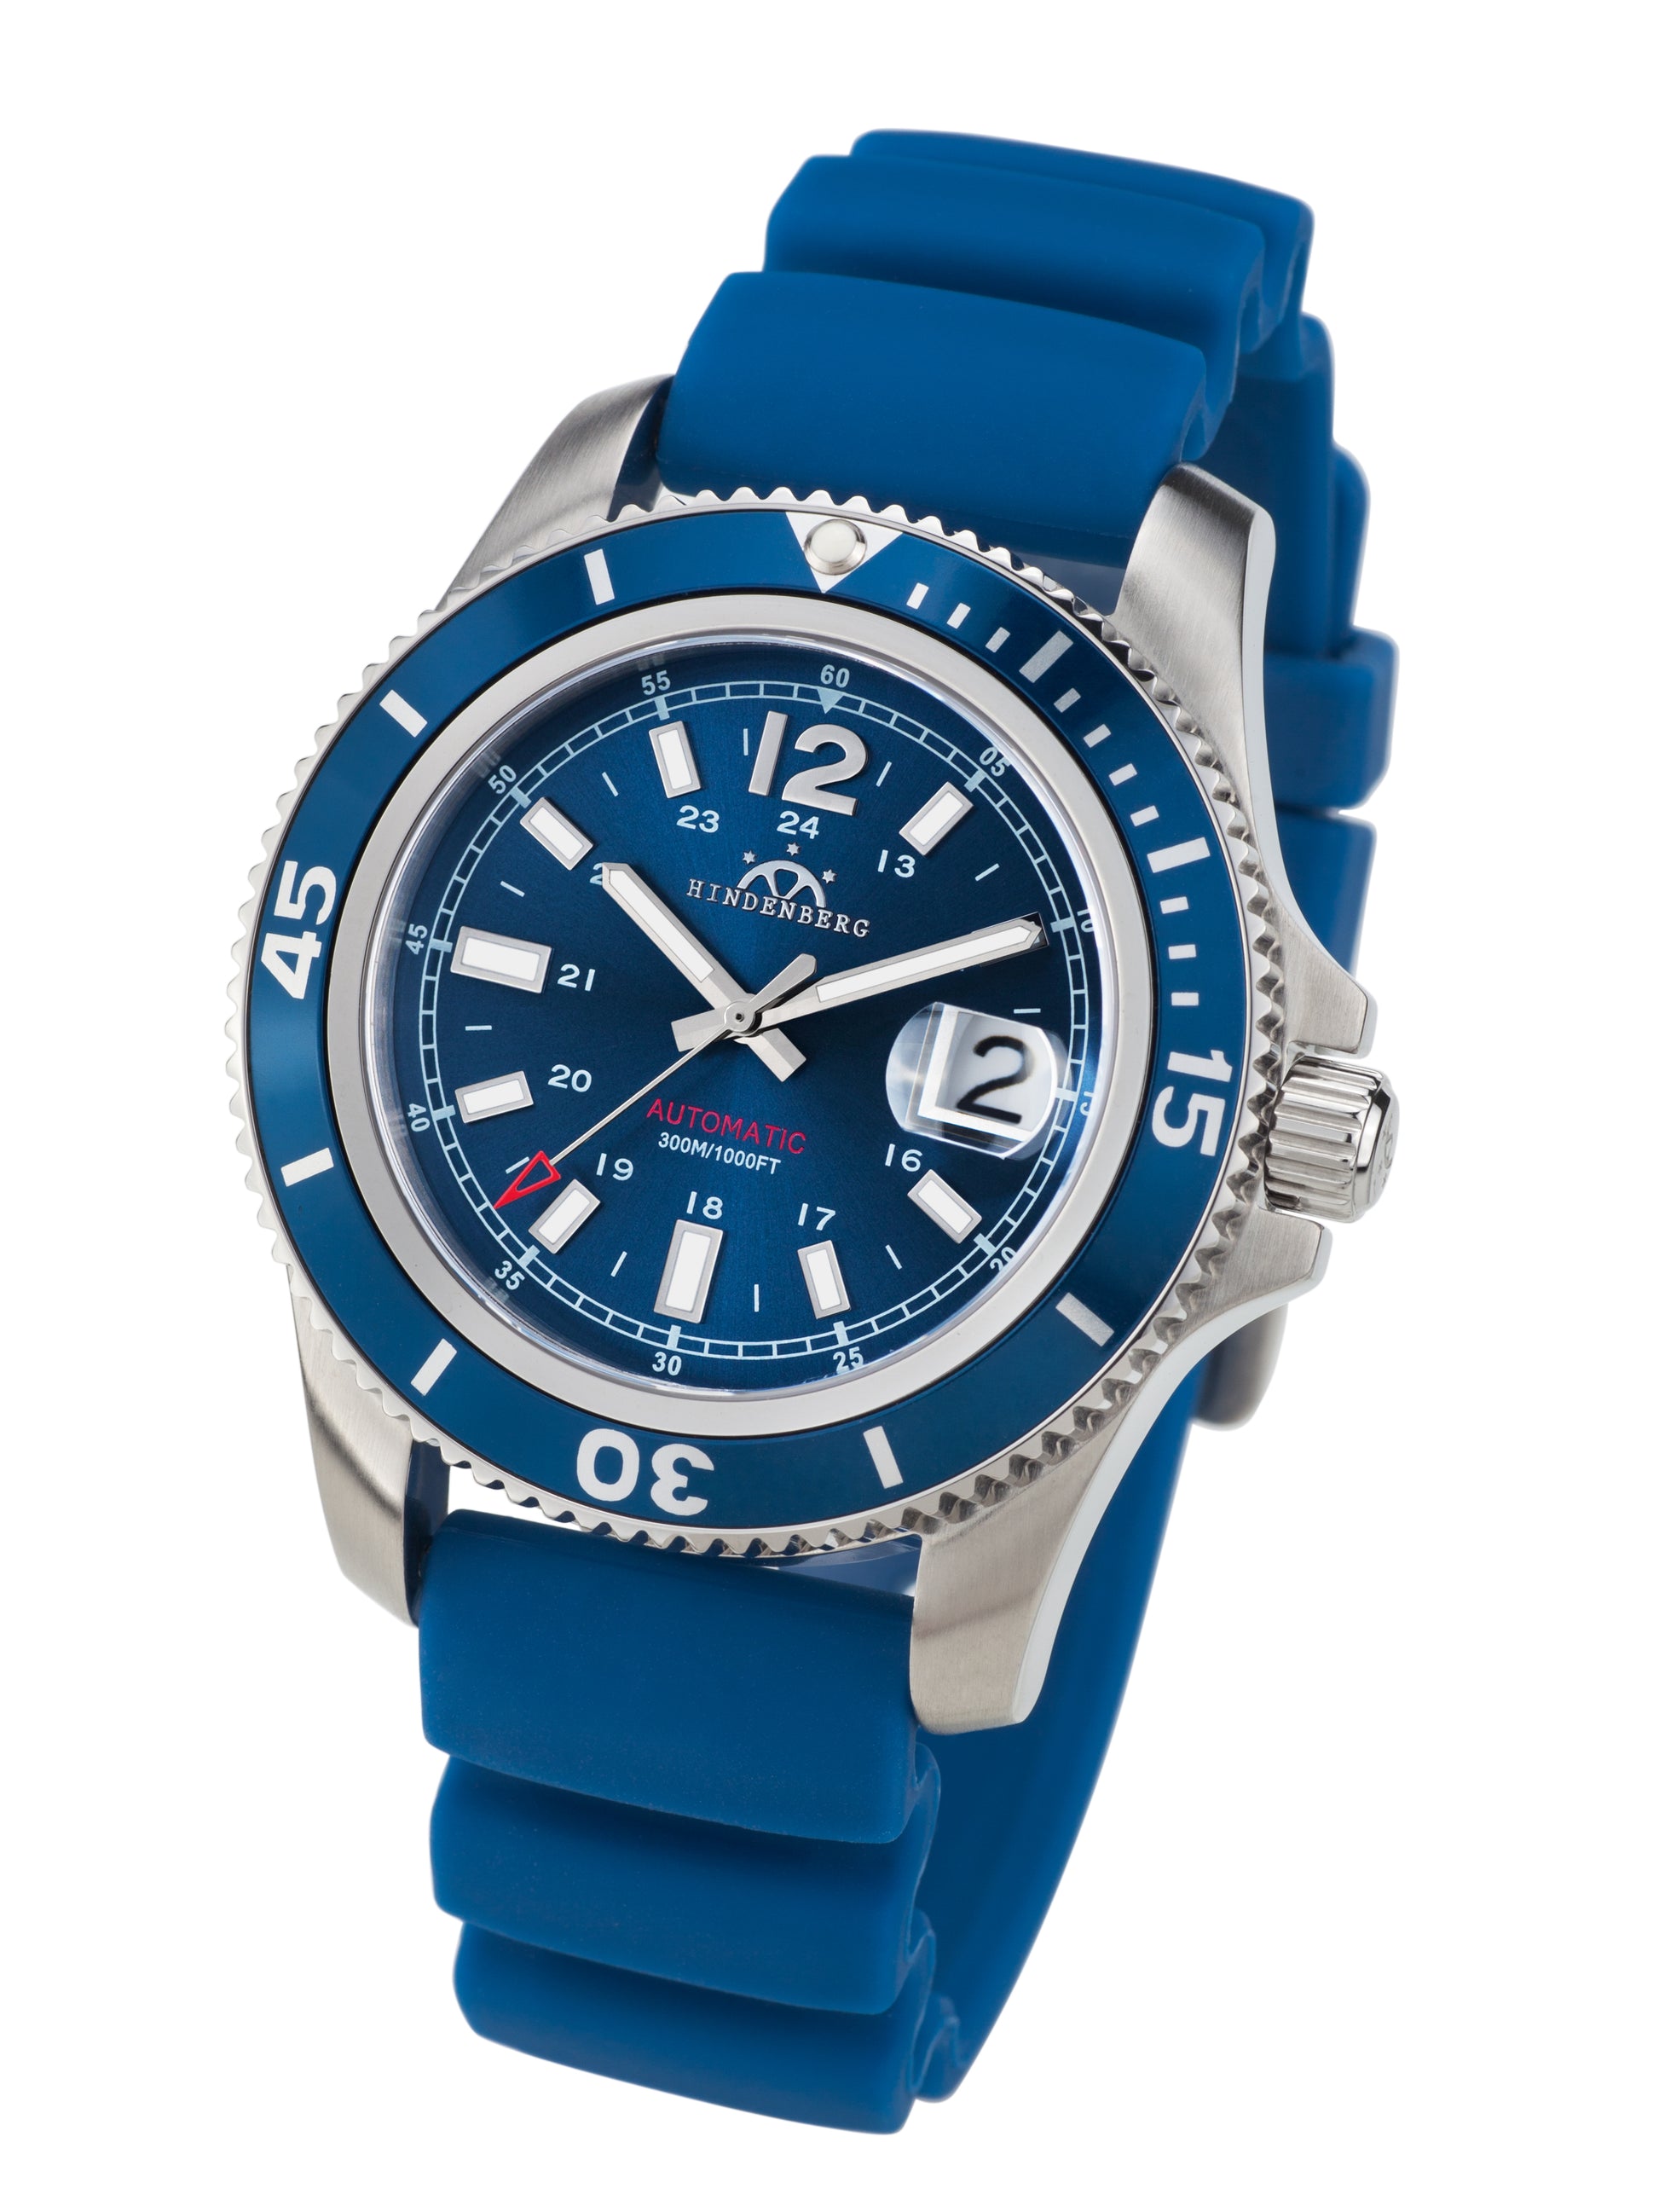 Automatic watches — Diver Professional — Hindenberg — blue